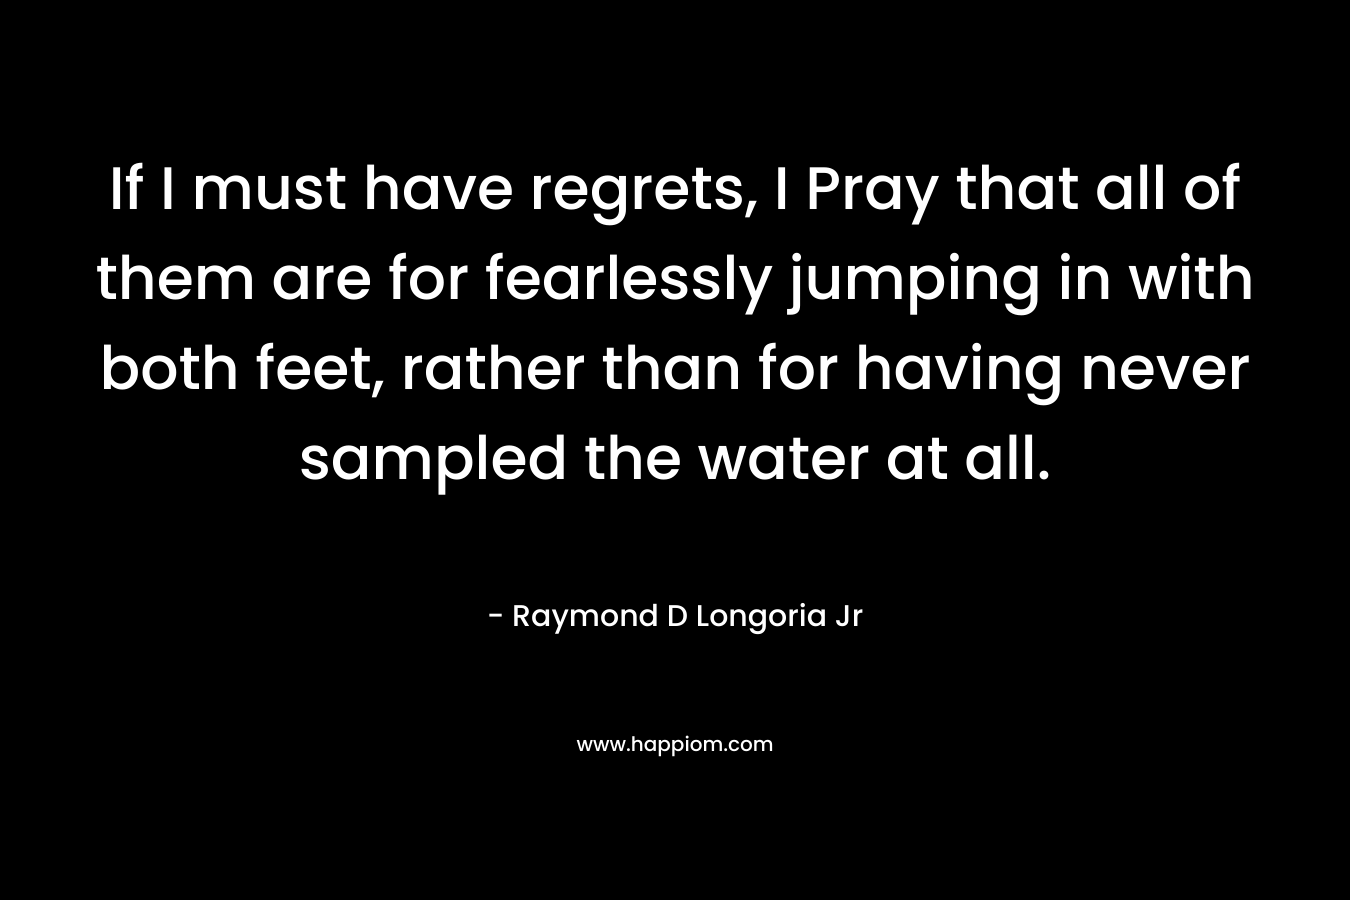 If I must have regrets, I Pray that all of them are for fearlessly jumping in with both feet, rather than for having never sampled the water at all. – Raymond D Longoria Jr